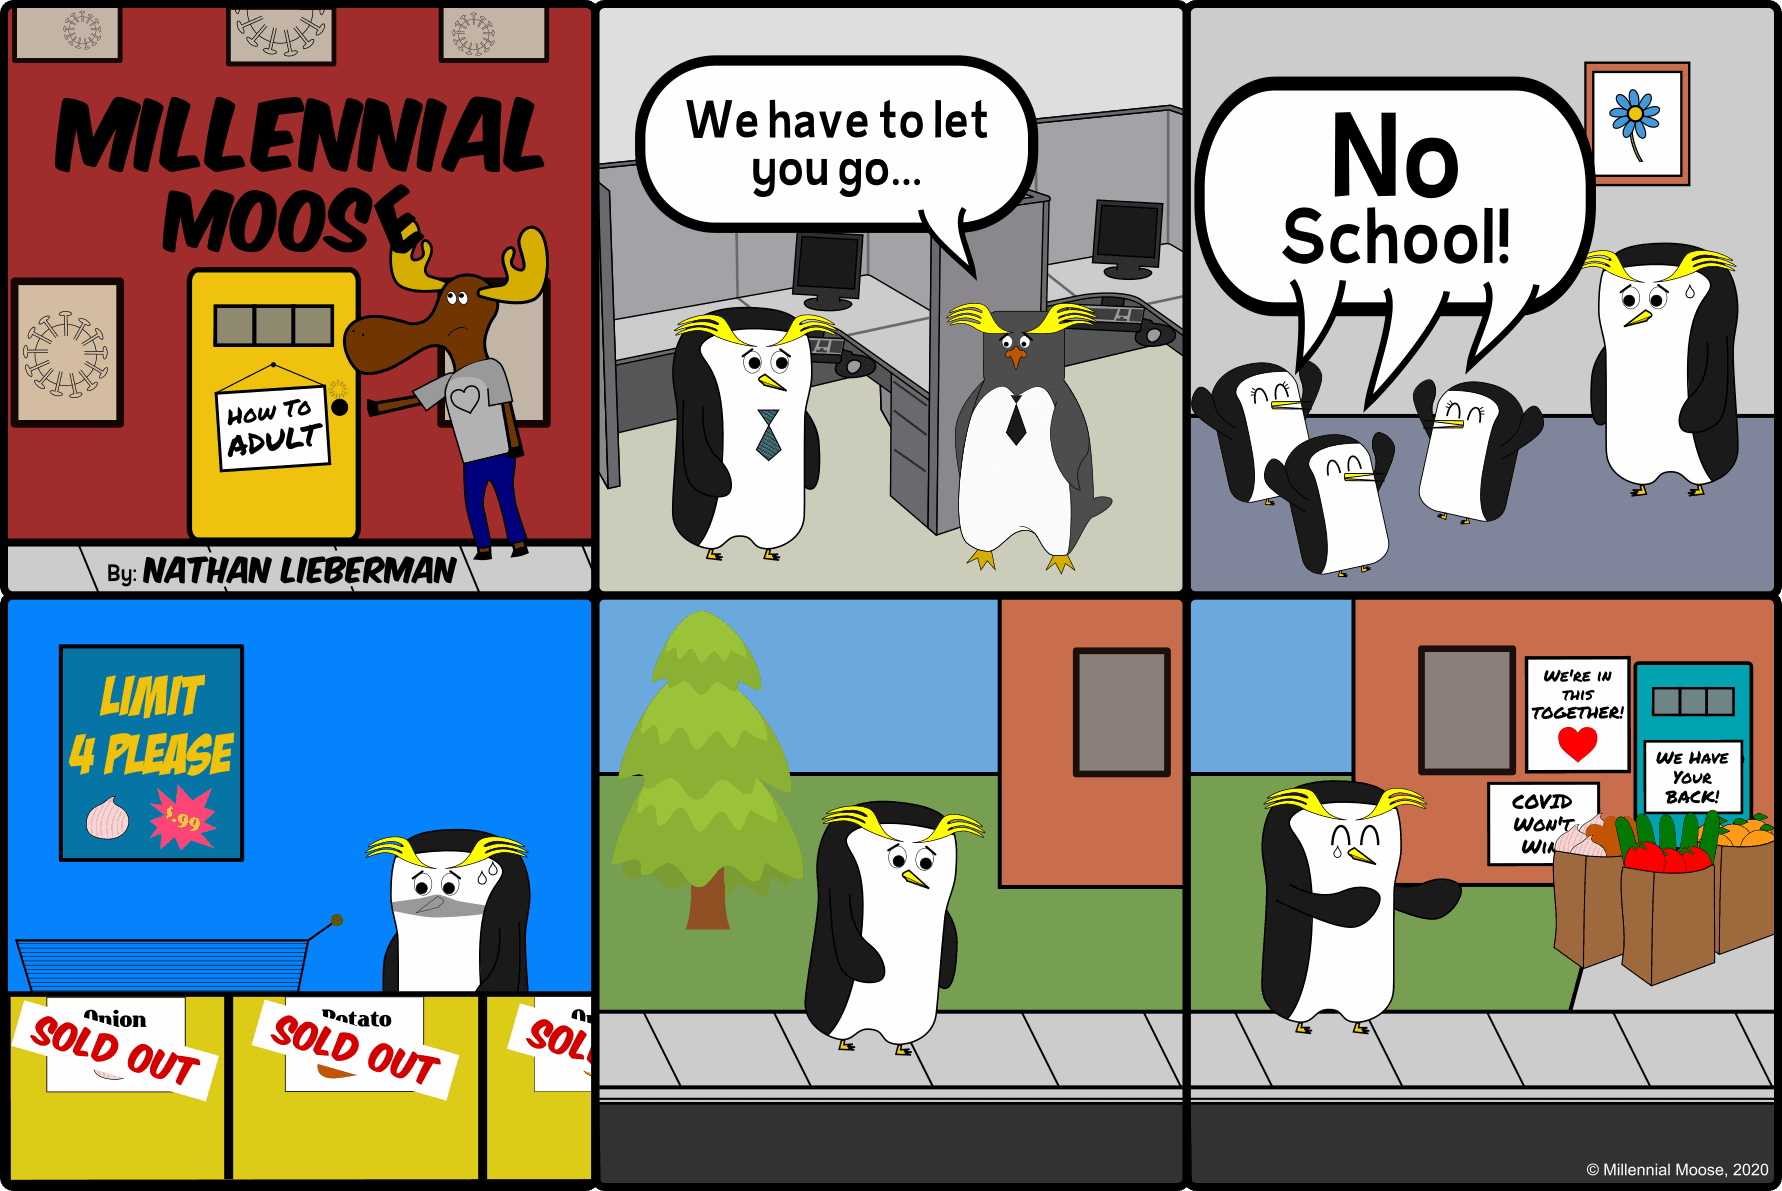 In this Millennial Moose comic, our older Millennial penguin has fallen on hard times during the coronavirus pandemic. They were laid off from their job, the kids are running around as schools are closed, and the supermarkets and grocery stores are out of food. It's tough in the land of coronavirus, but in the end penguin's community steps up with some much need motivational messages and a couple bags of groceries to save the day.